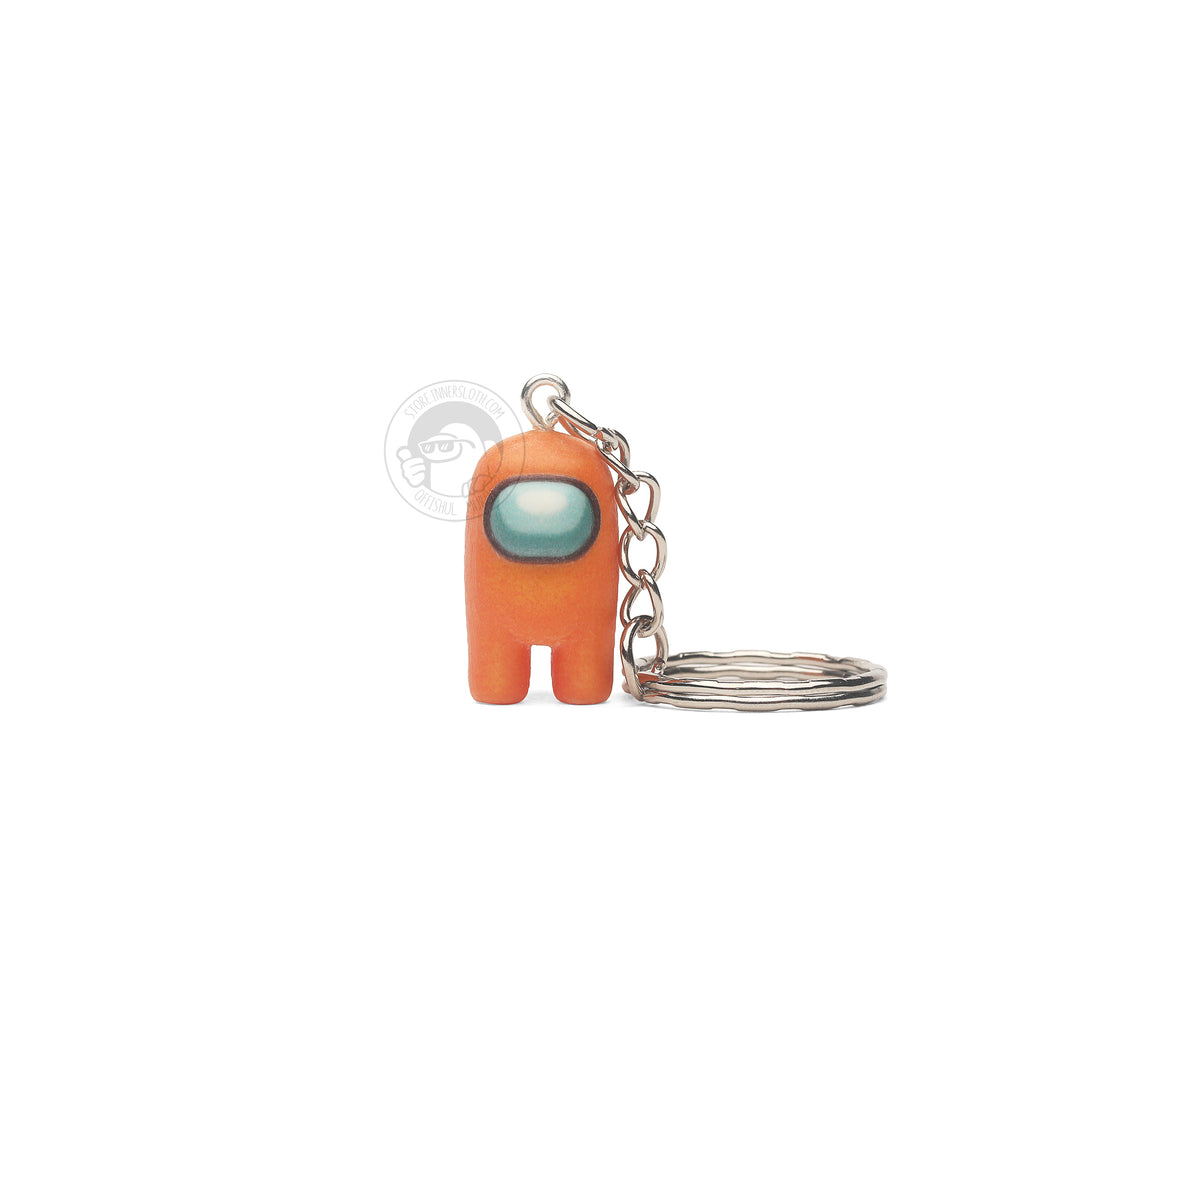 Among Us: Crewmate Keychain by Objex Unlimited Inc.